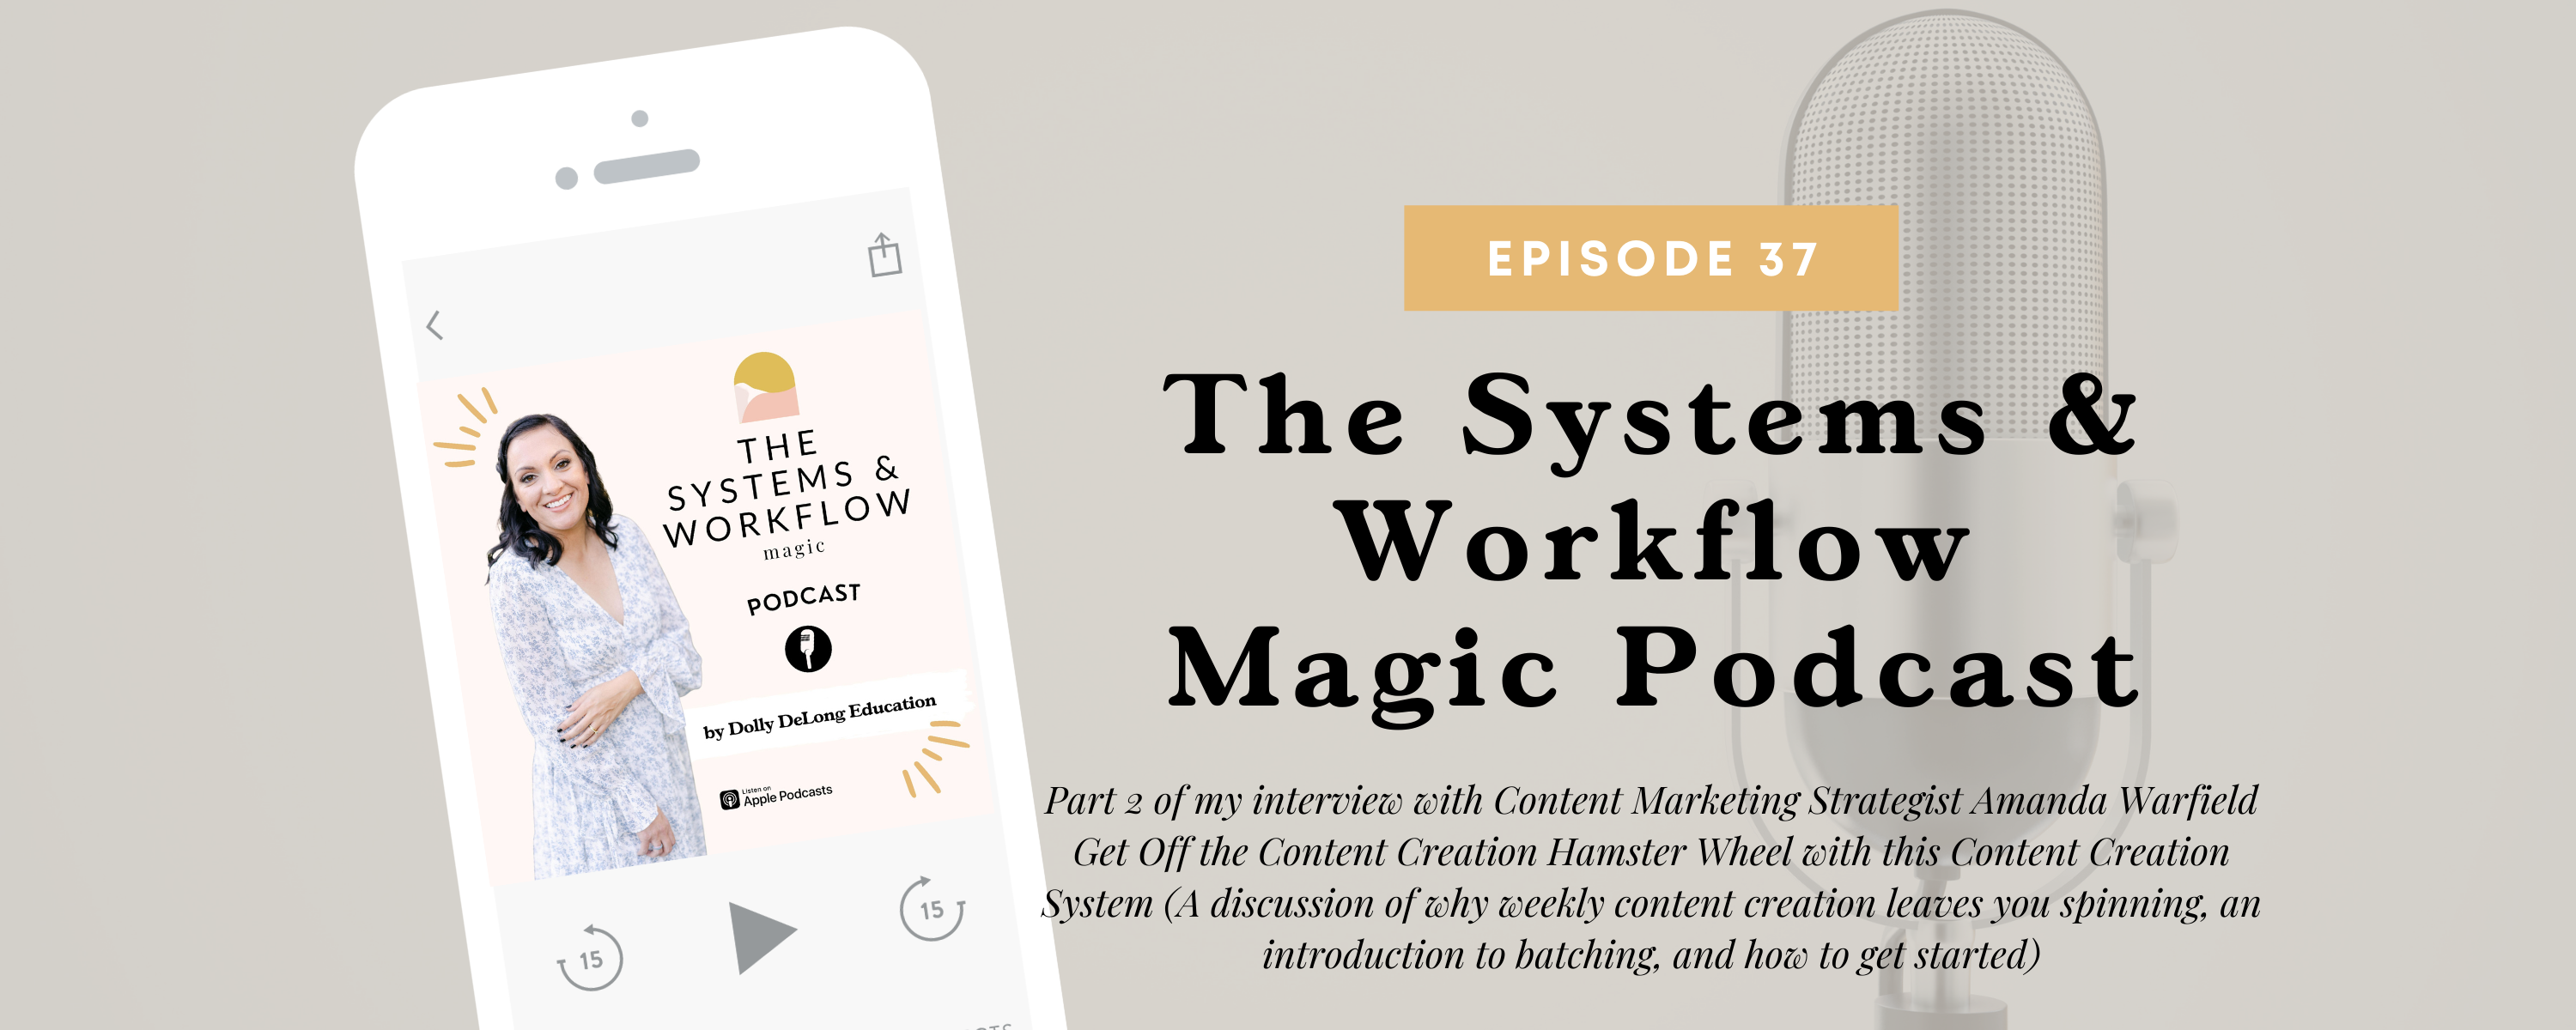 Episode 37 of the Systems & Workflow Magic Podcast with Dolly DeLong and Amanda Warfield